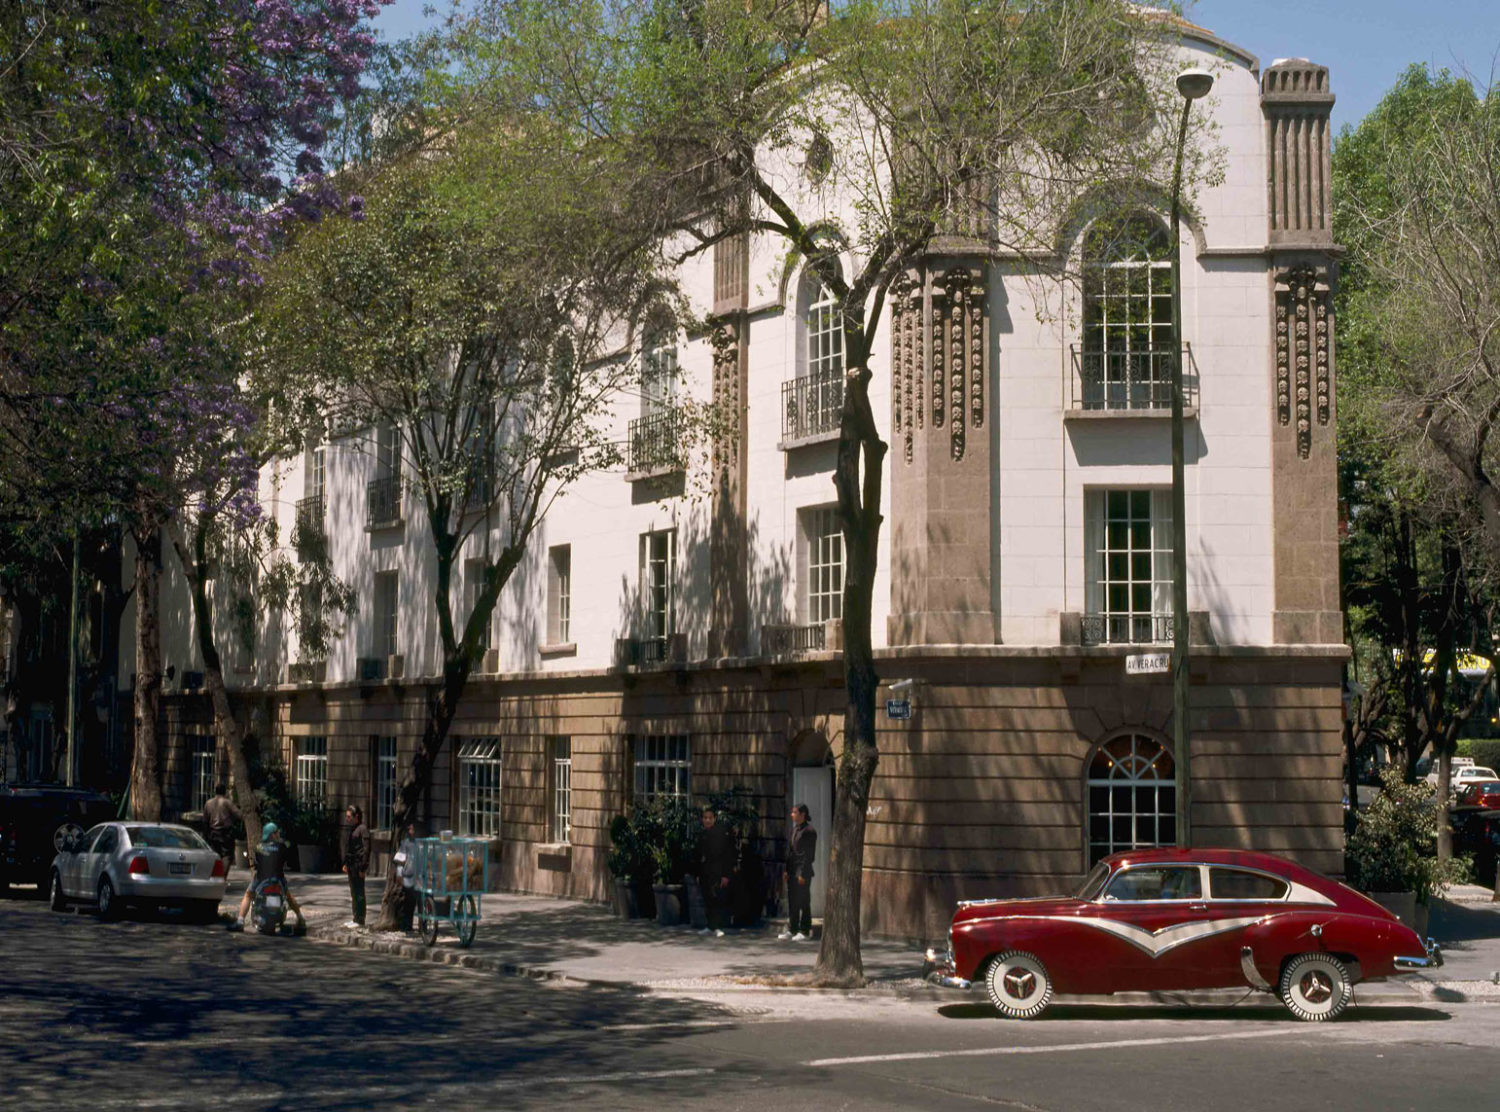 Condesa DF The picture perfect block of the Condesa cutie. The location is perfect for exploring all the great spots